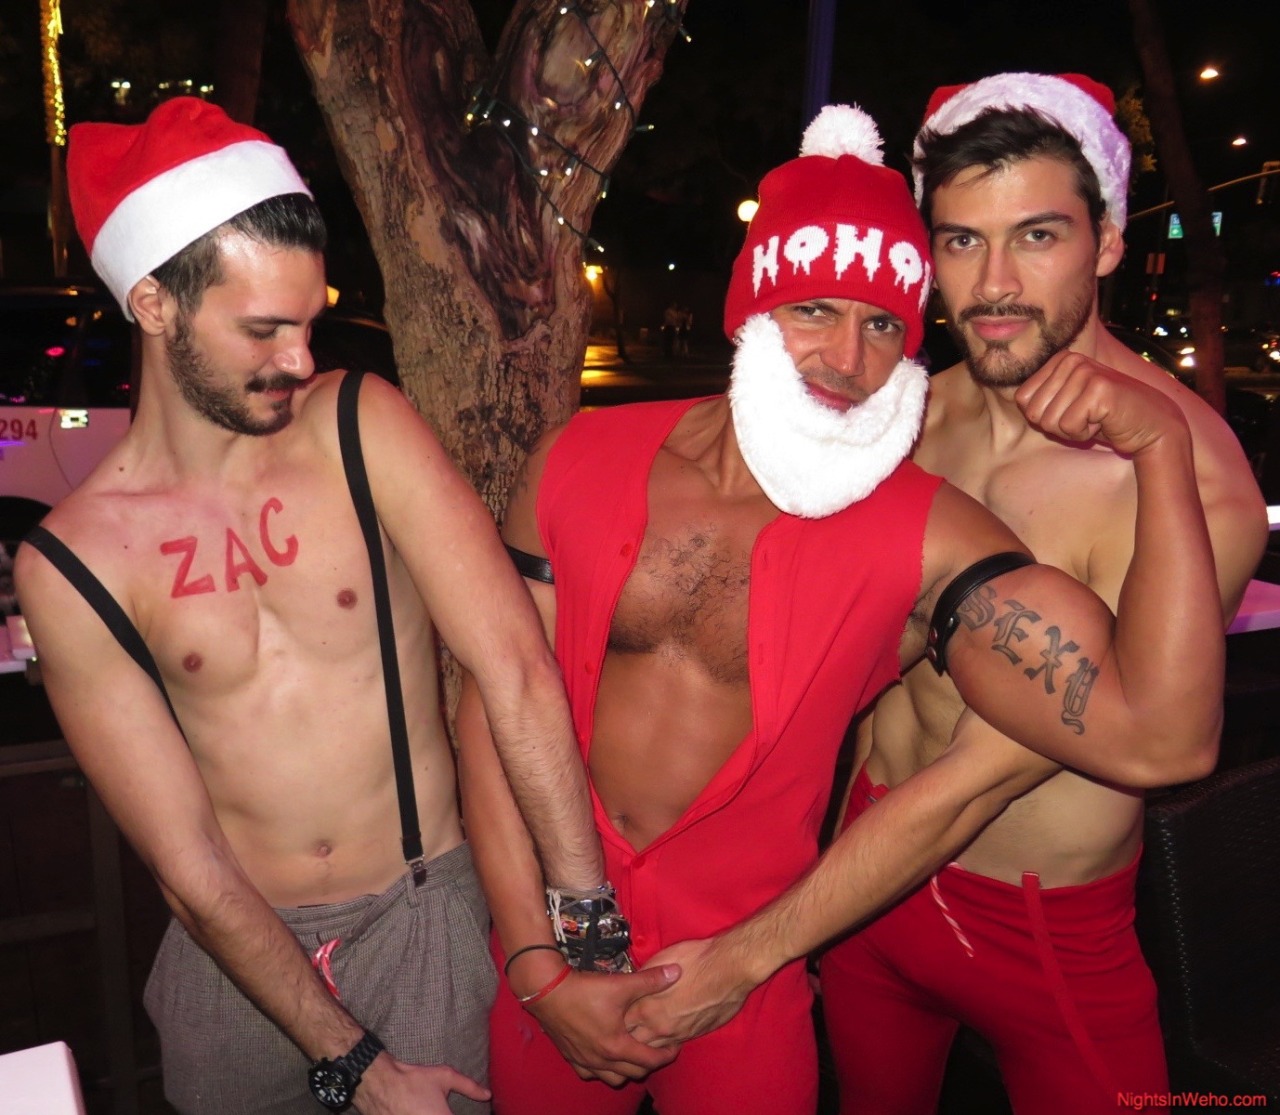 WEST HOLLYWOOD NIGHTS If Santa And His Elves Were Gay